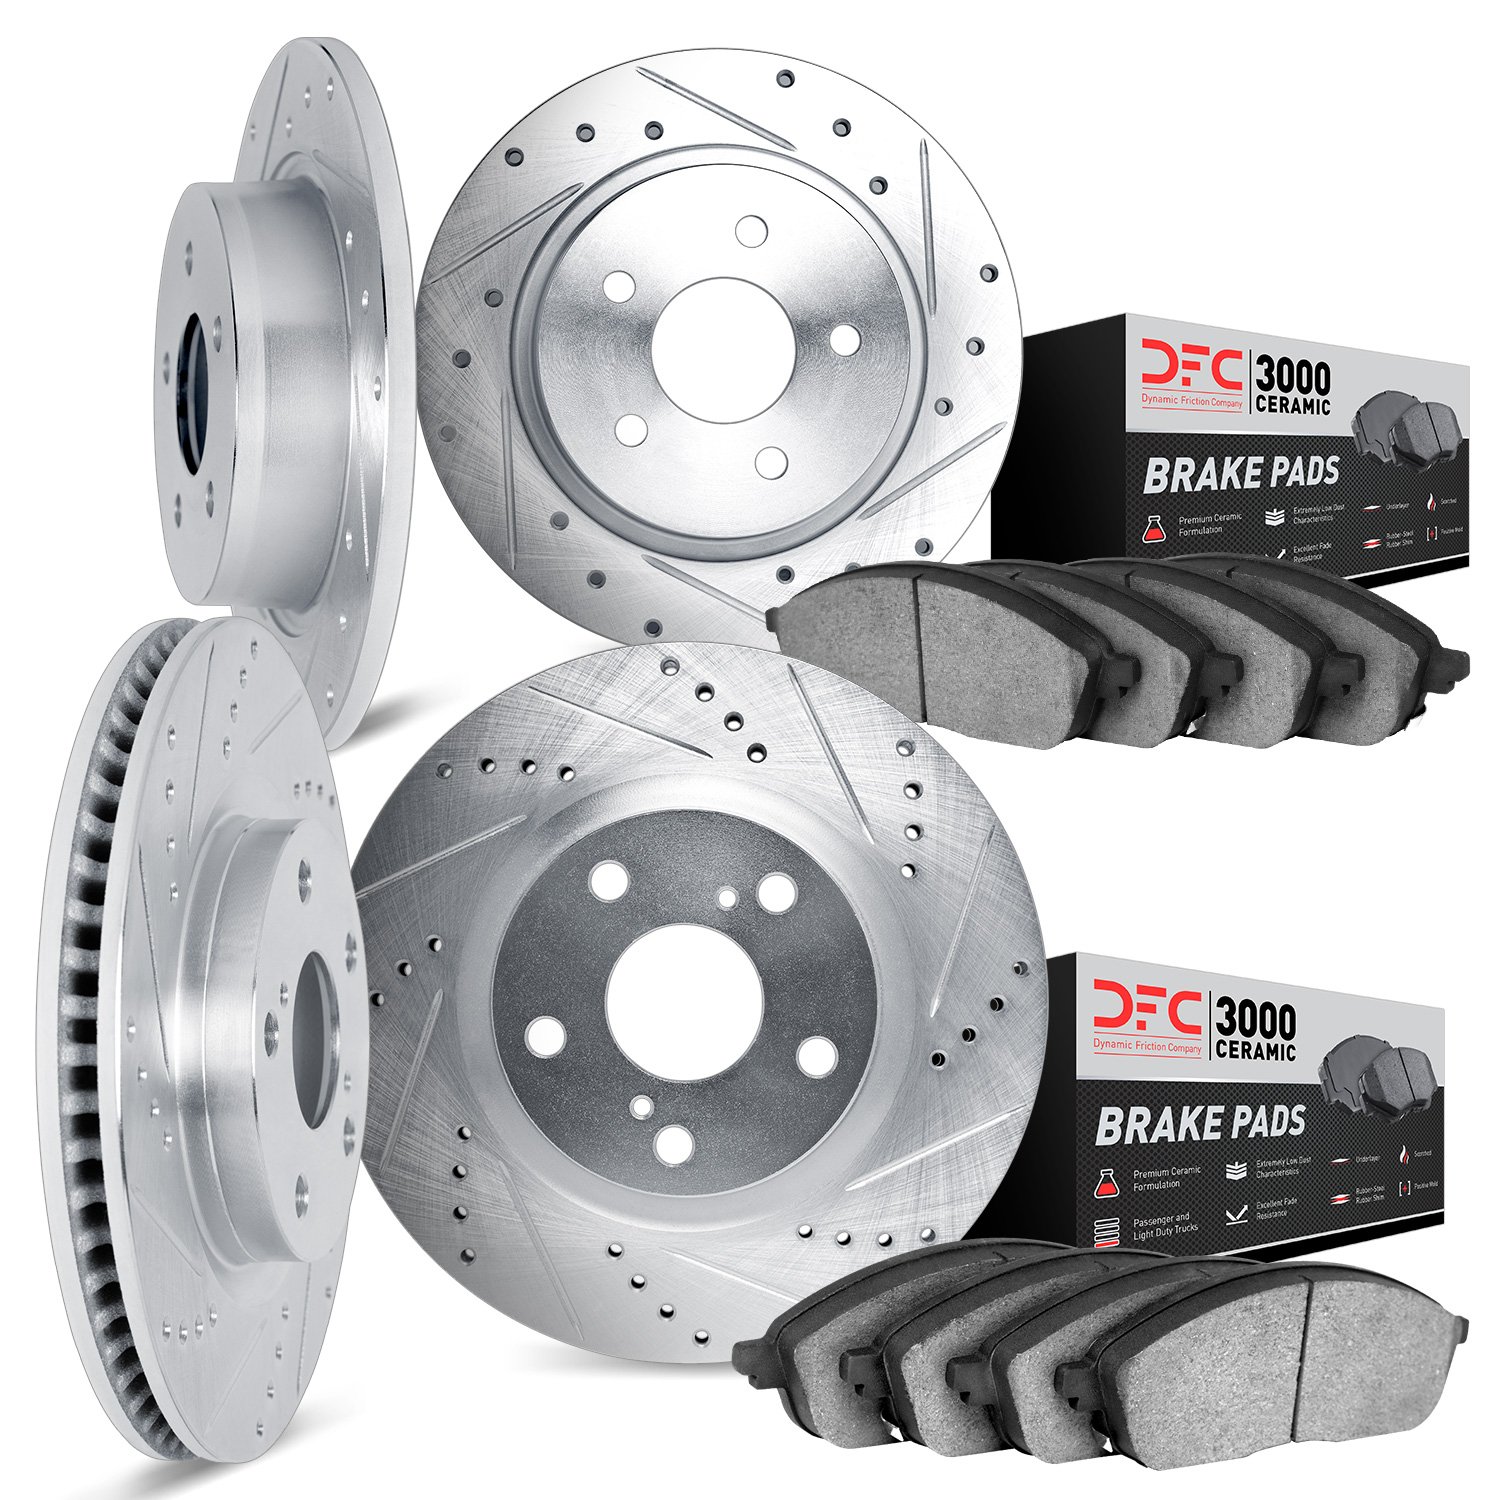 7304-54034 Drilled/Slotted Brake Rotor with 3000-Series Ceramic Brake Pads Kit [Silver], 1997-2000 Ford/Lincoln/Mercury/Mazda, P